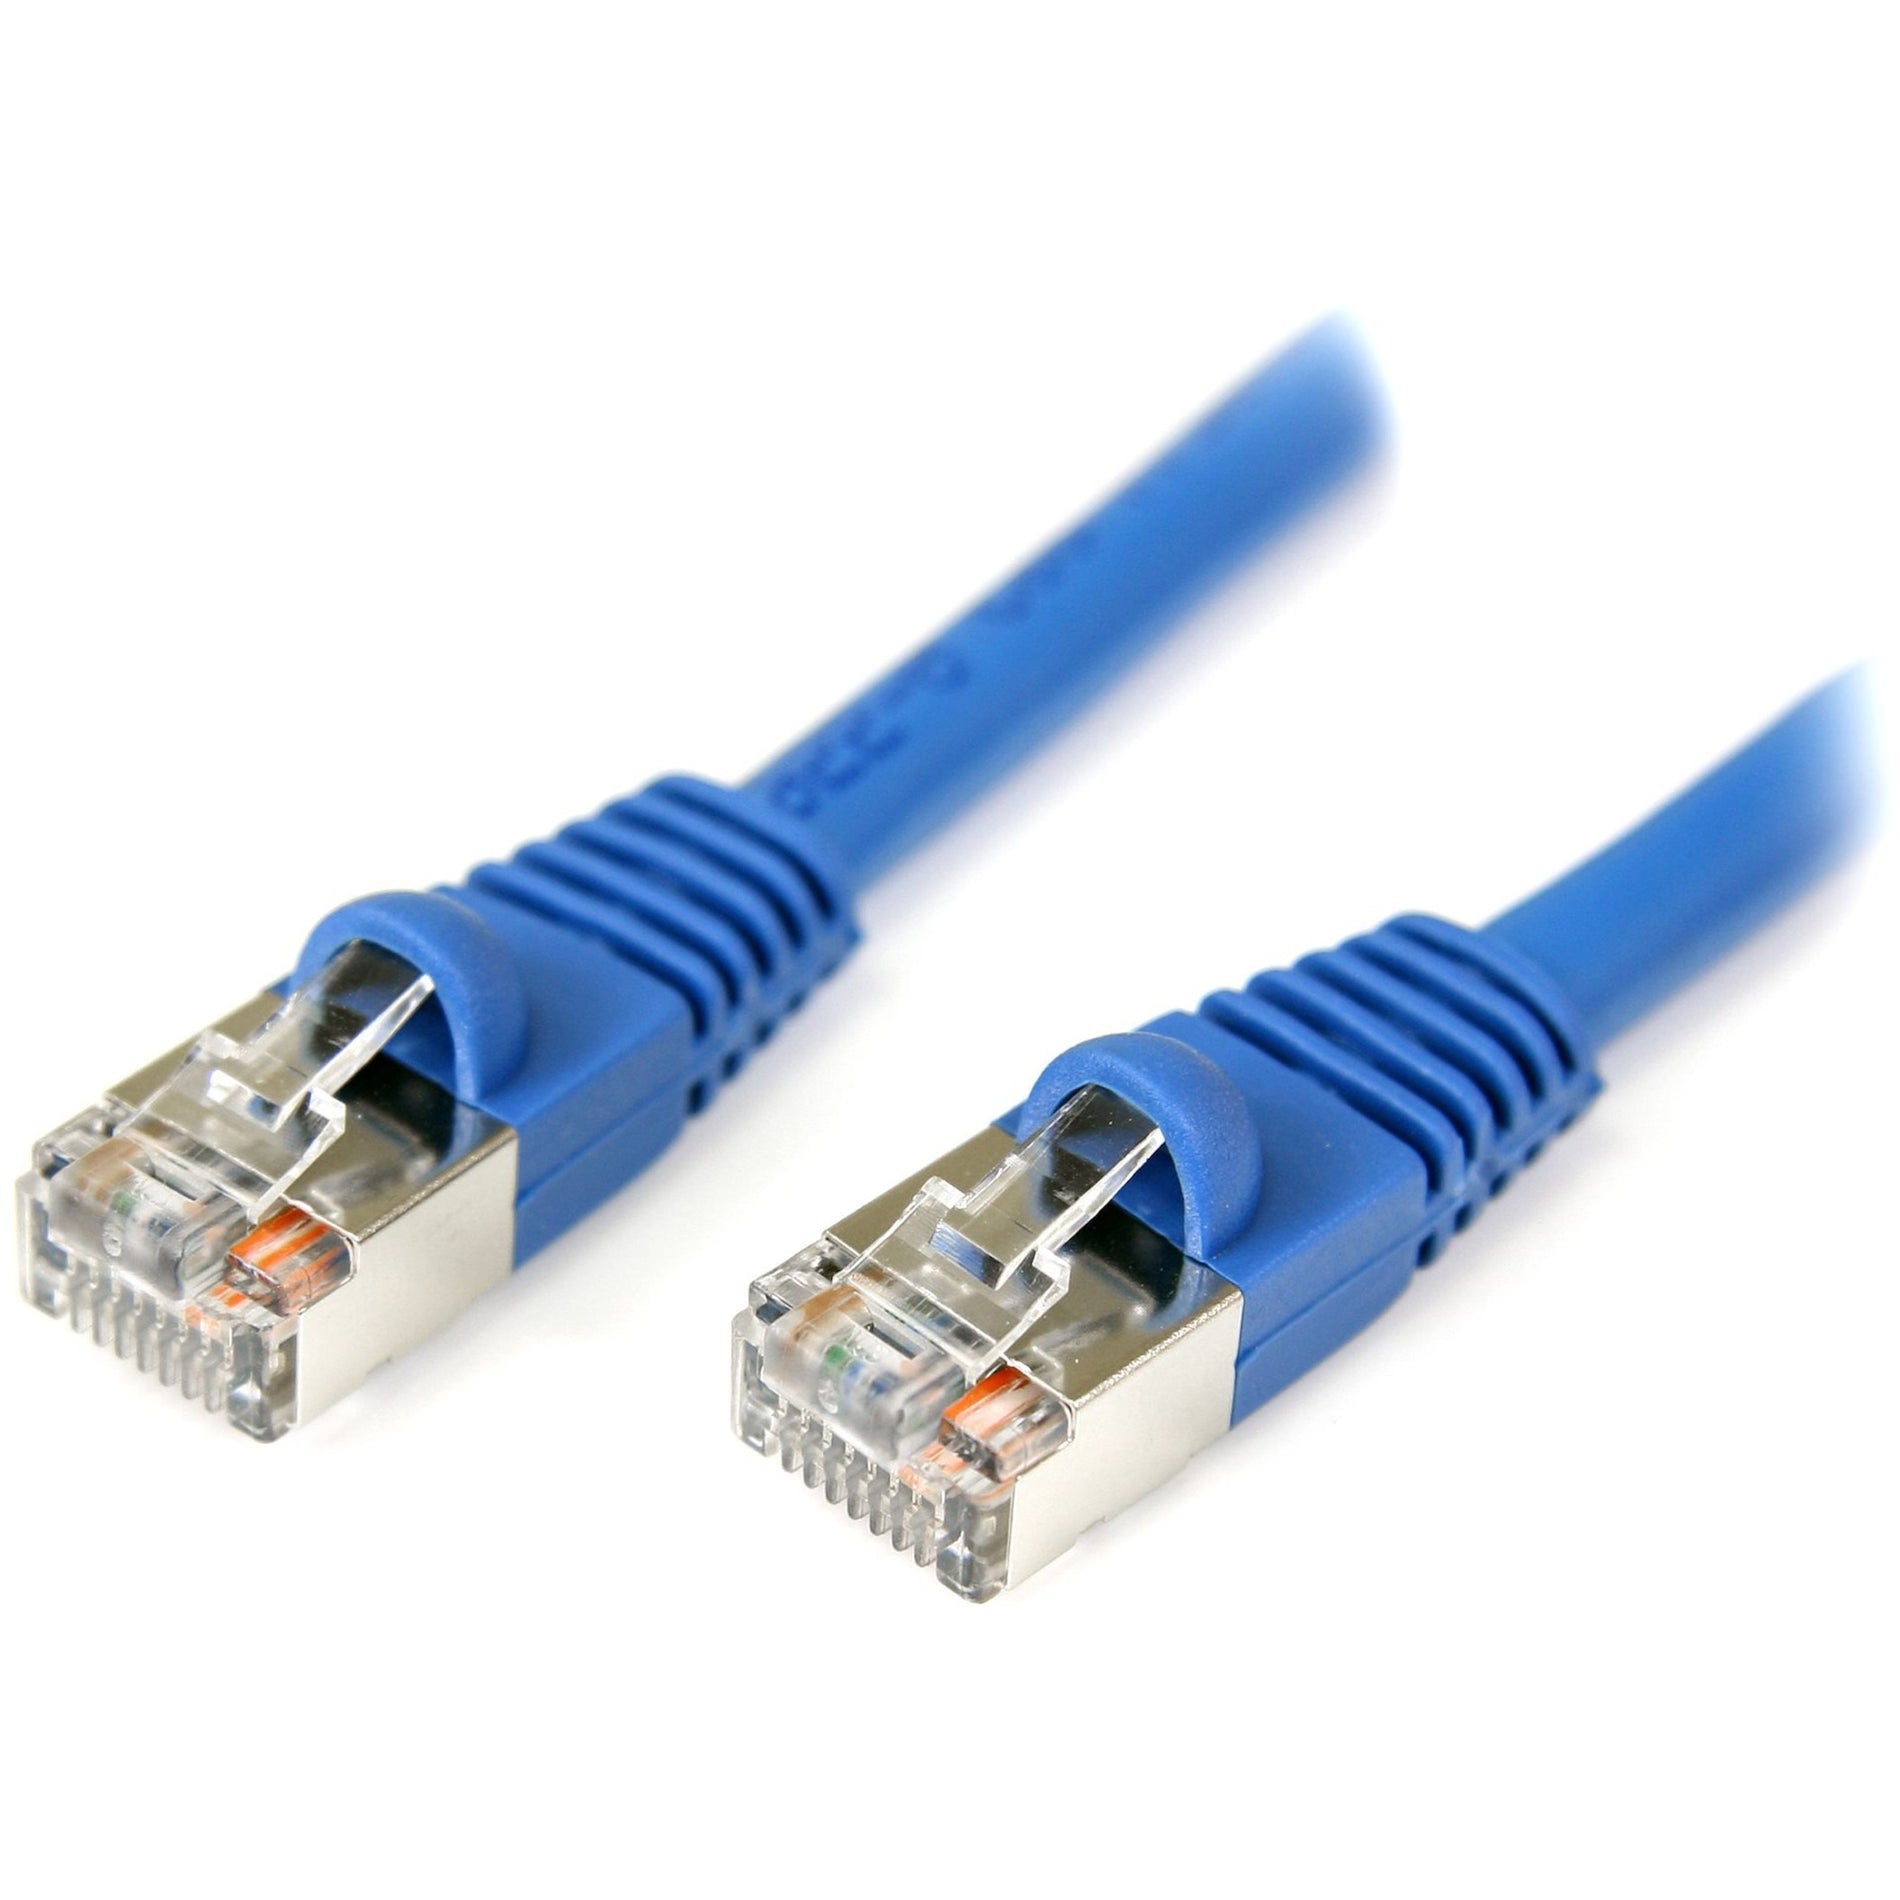 StarTech.com S45PATCH25BL 25 ft Blue Shielded Snagless Cat5e Patch Cable, Molded, Flexible, Gold Plated Connectors, Lifetime Warranty